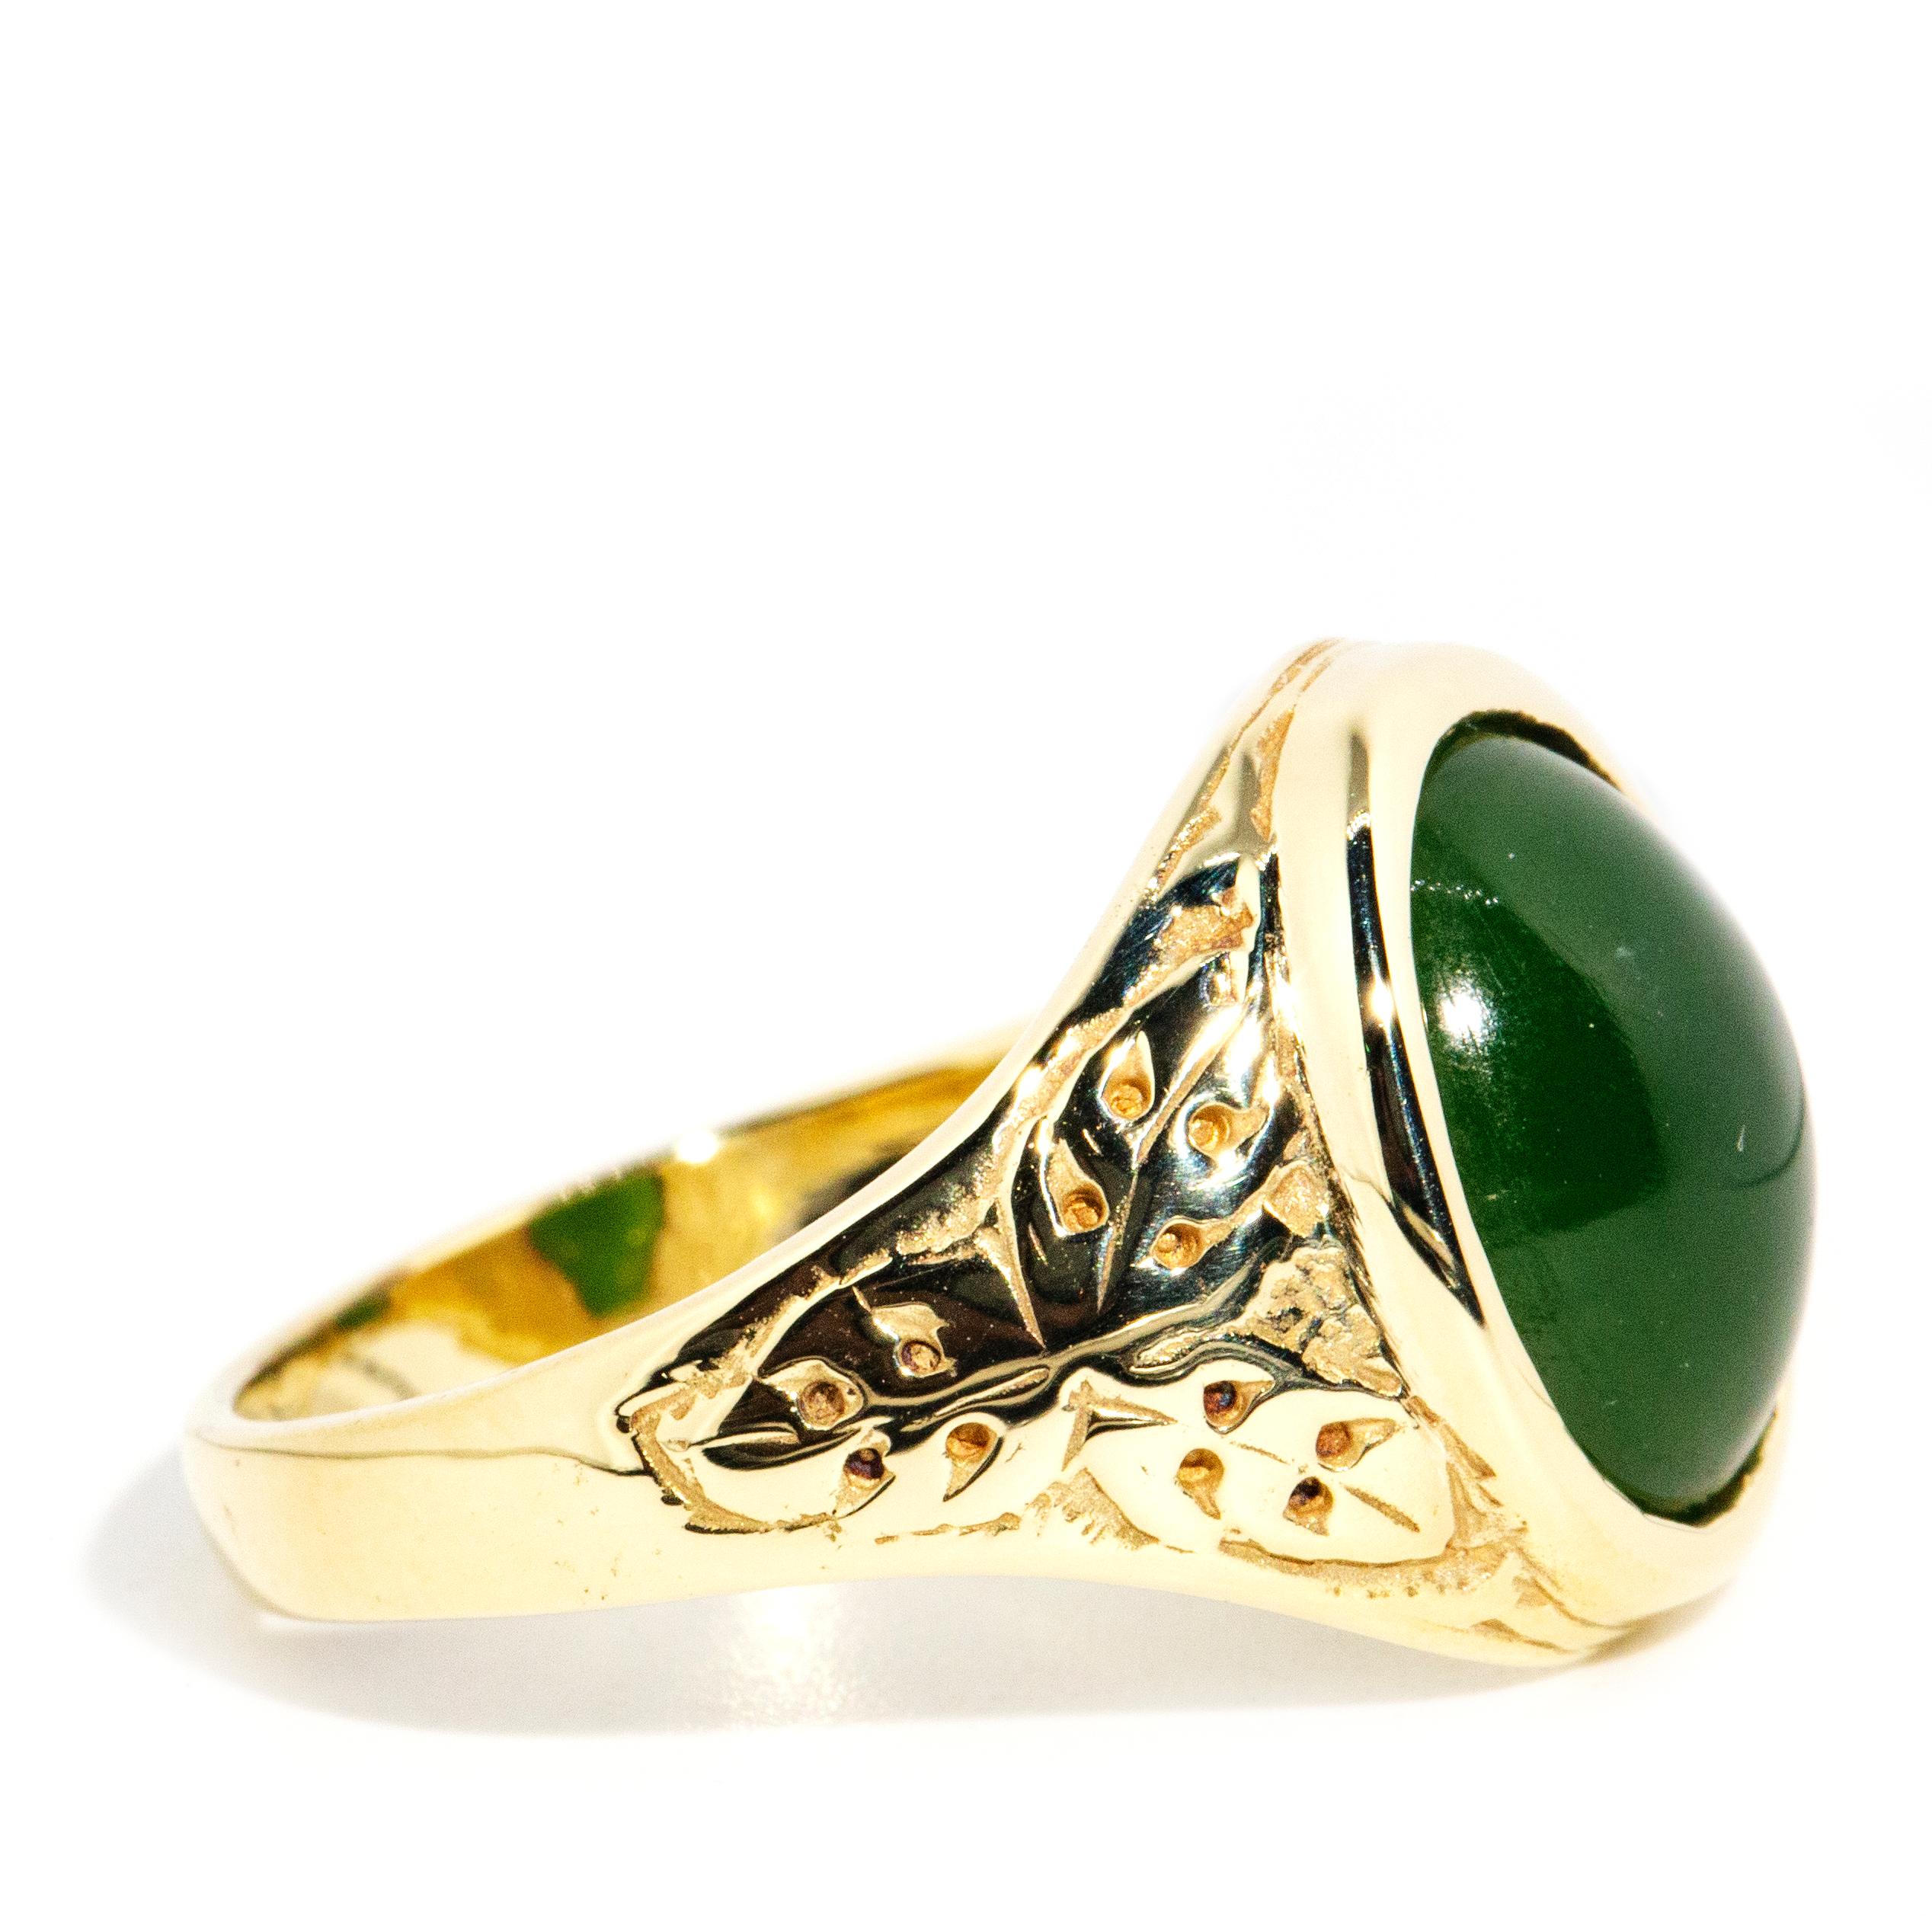 Modern Vintage Circa 1980s Deep Green Nephrite Jade Cabochon Ring 14 Carat Yellow Gold For Sale